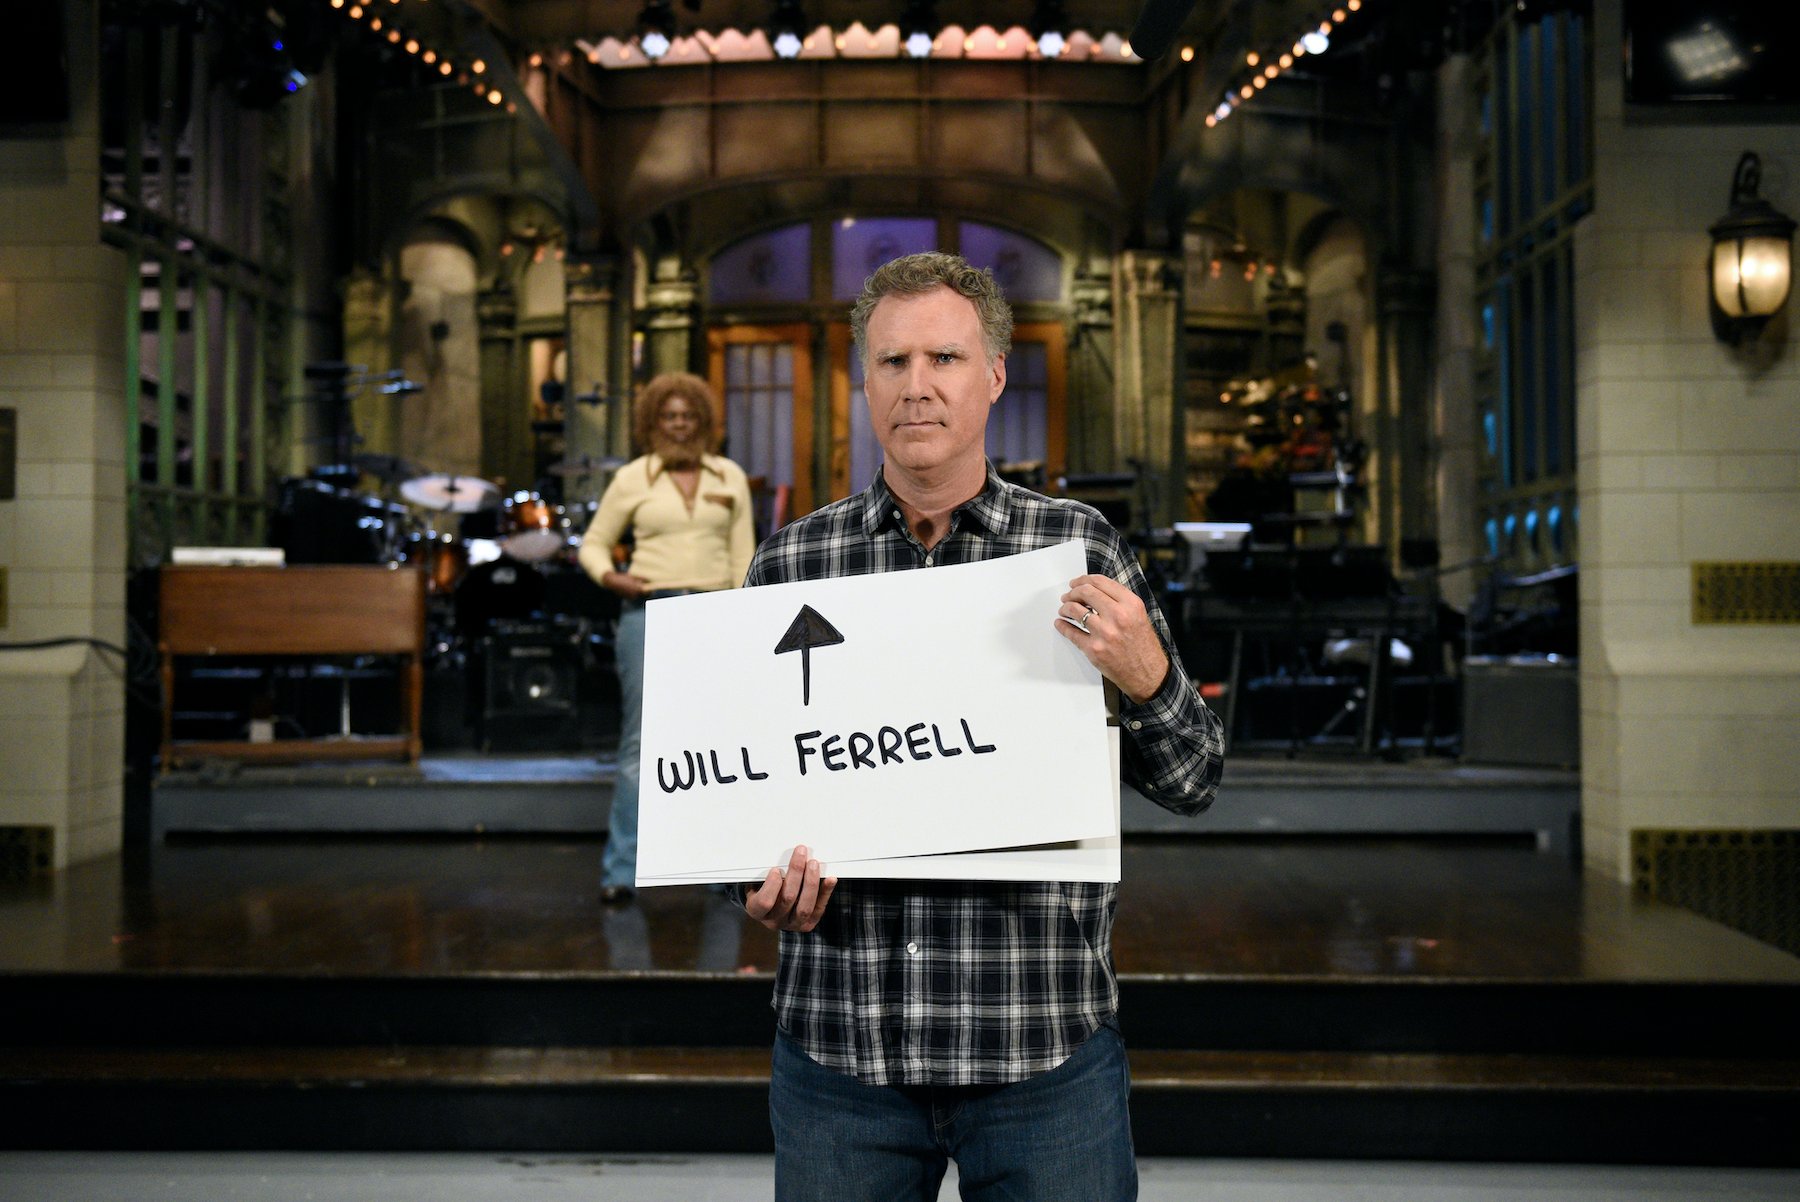 Will Ferrell on the 'SNL' stage holding a sign that says 'Will Ferrell'